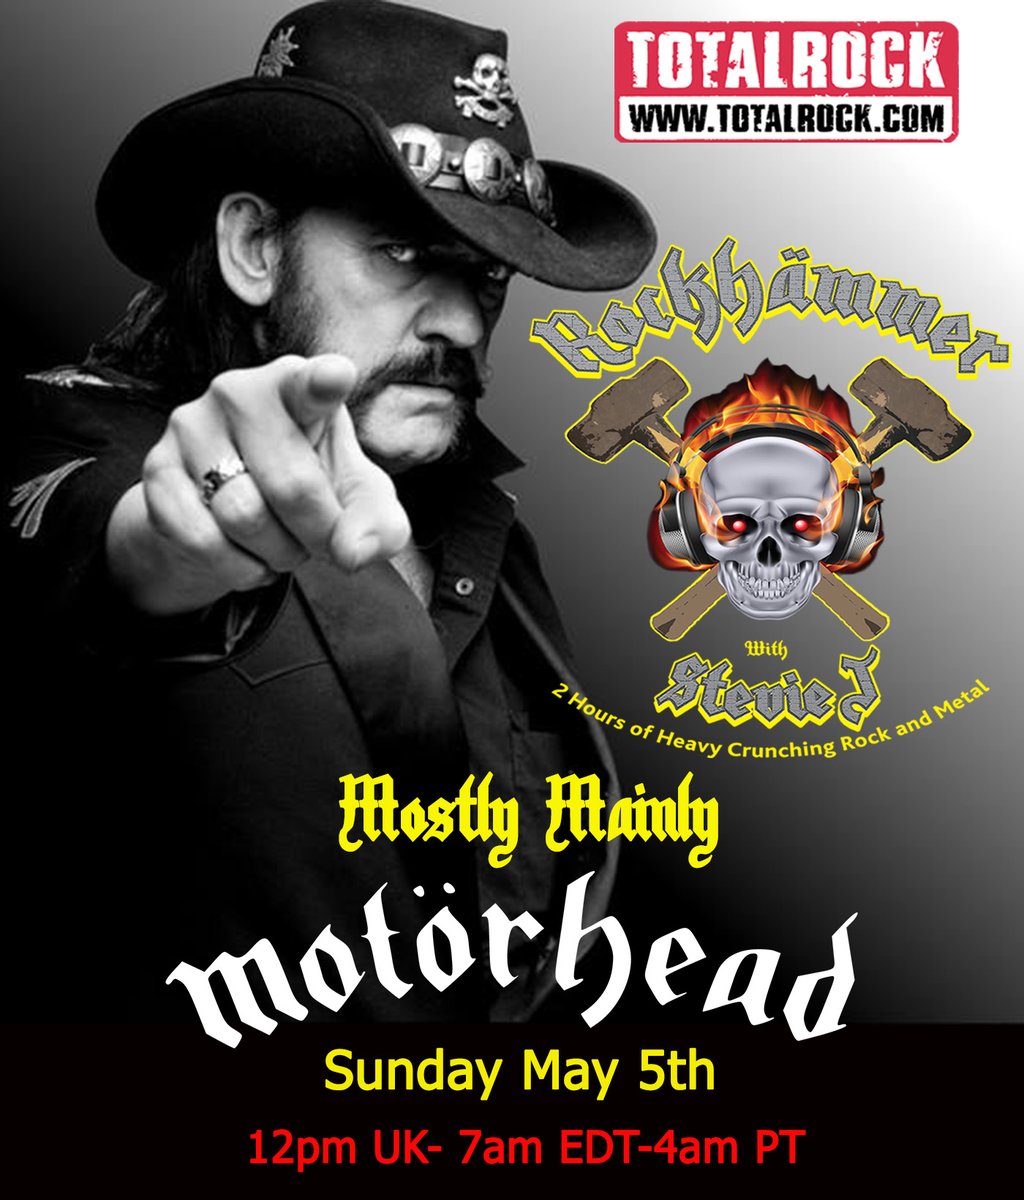 If you missed today's Mostly, Mainly @myMotorhead on @TotalRockOnline it's here for your heavy ears: mixcloud.com/RockhammerWith…